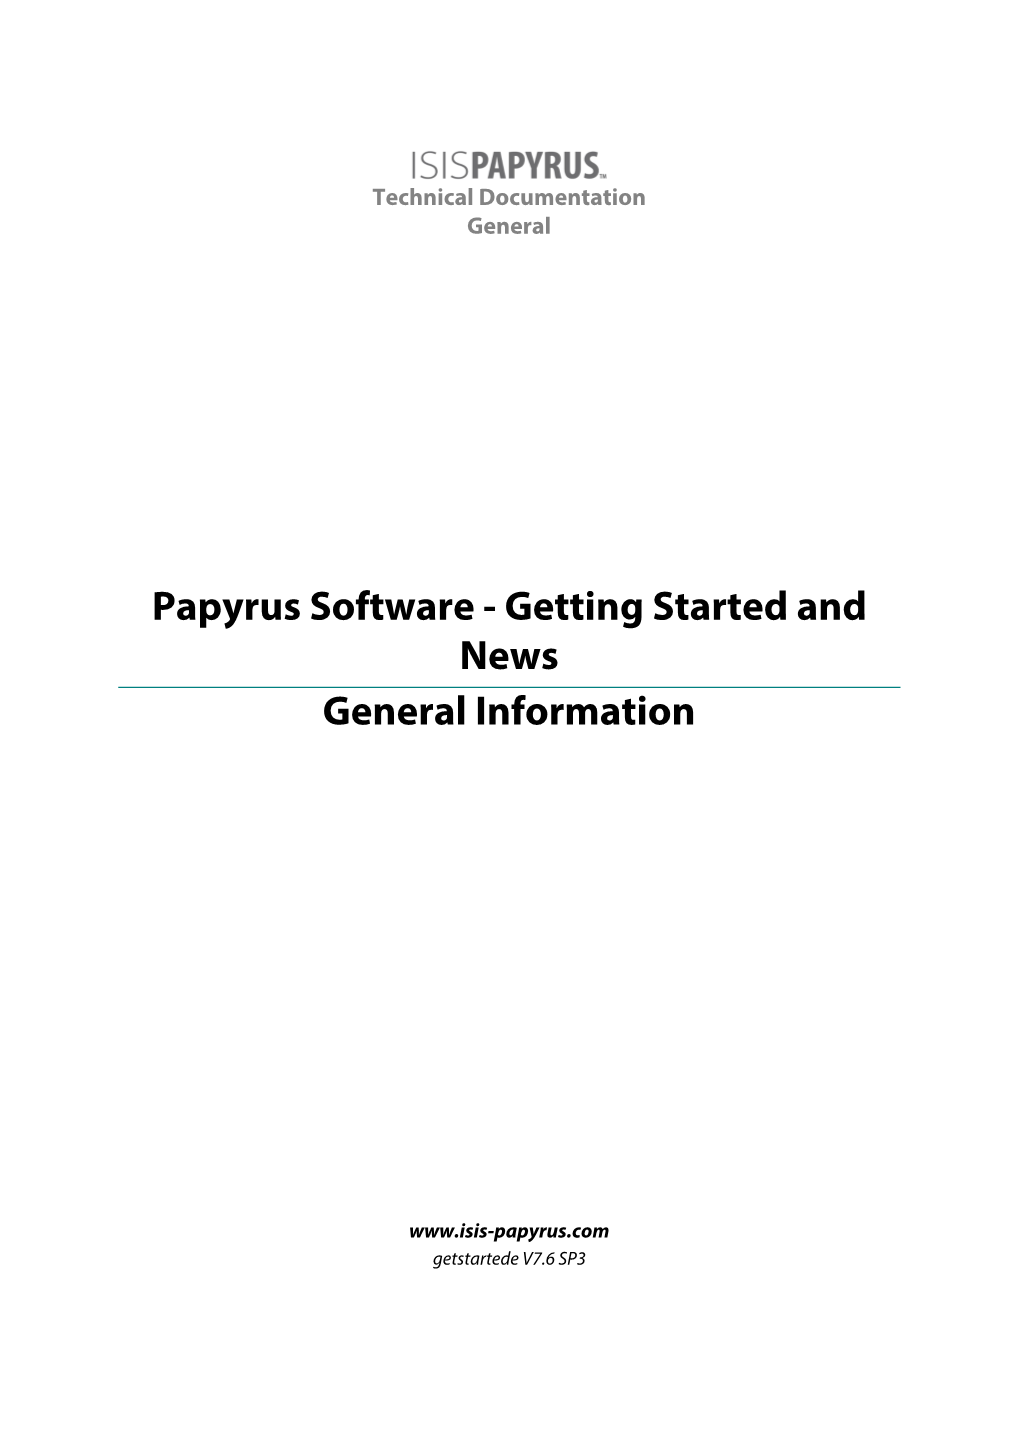 Papyrus Software - Getting Started and News General Information